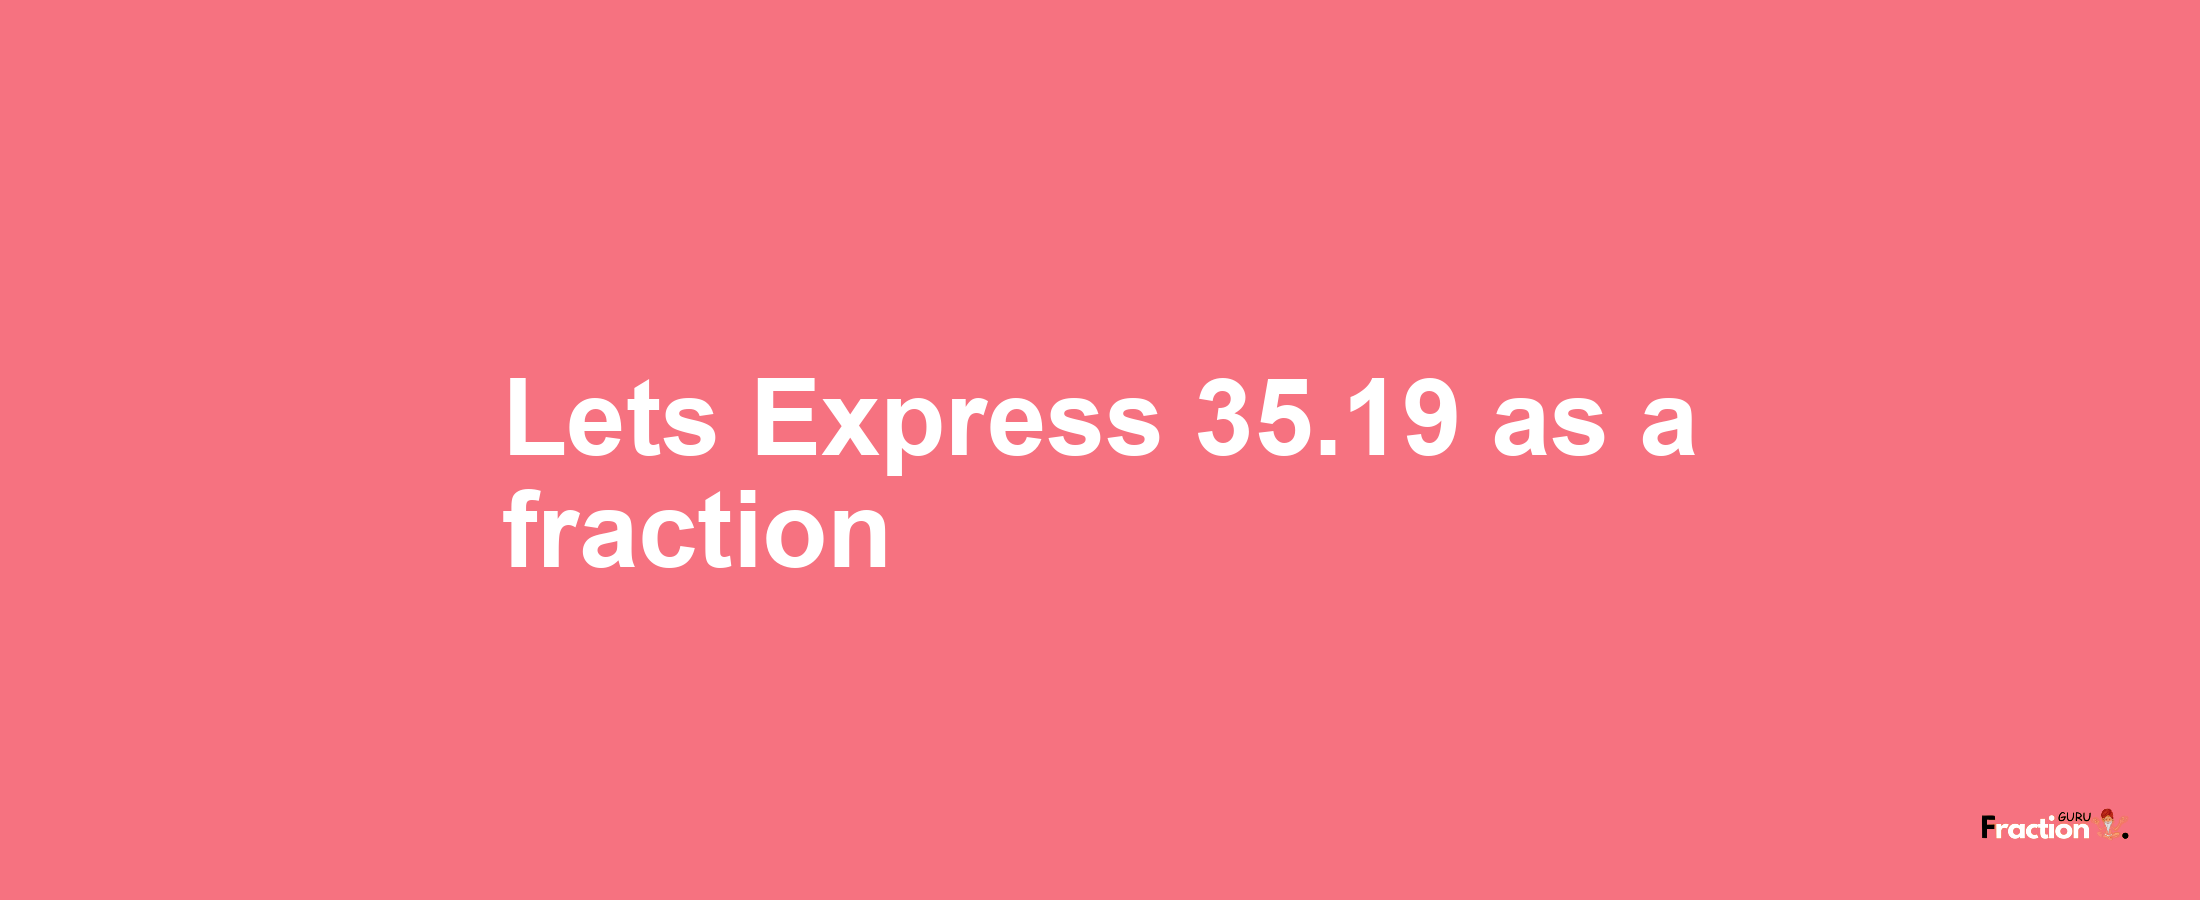 Lets Express 35.19 as afraction